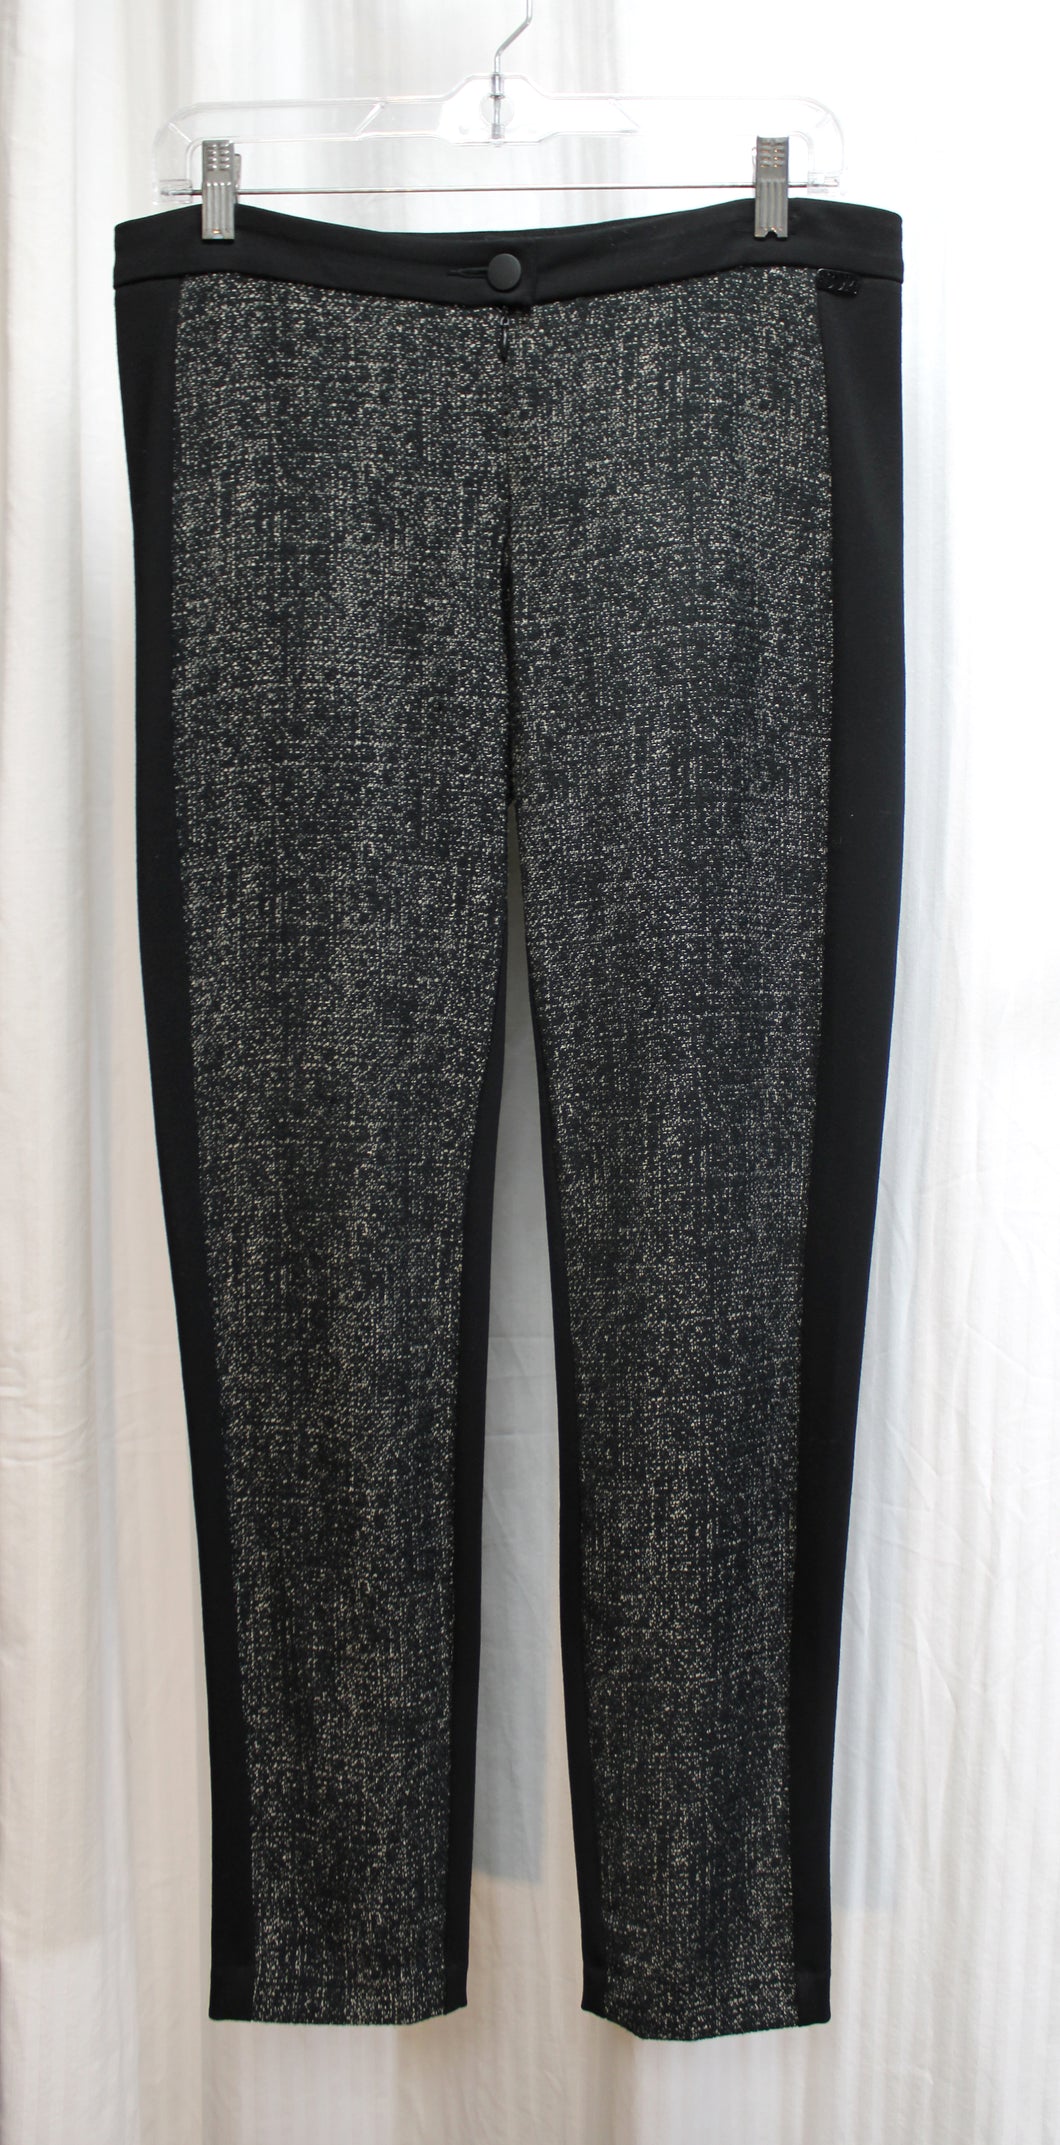 Cop Copine Paris - Black & Contrast Heathered Knit Front Panel Stretch Skinny Trousers - Size 31